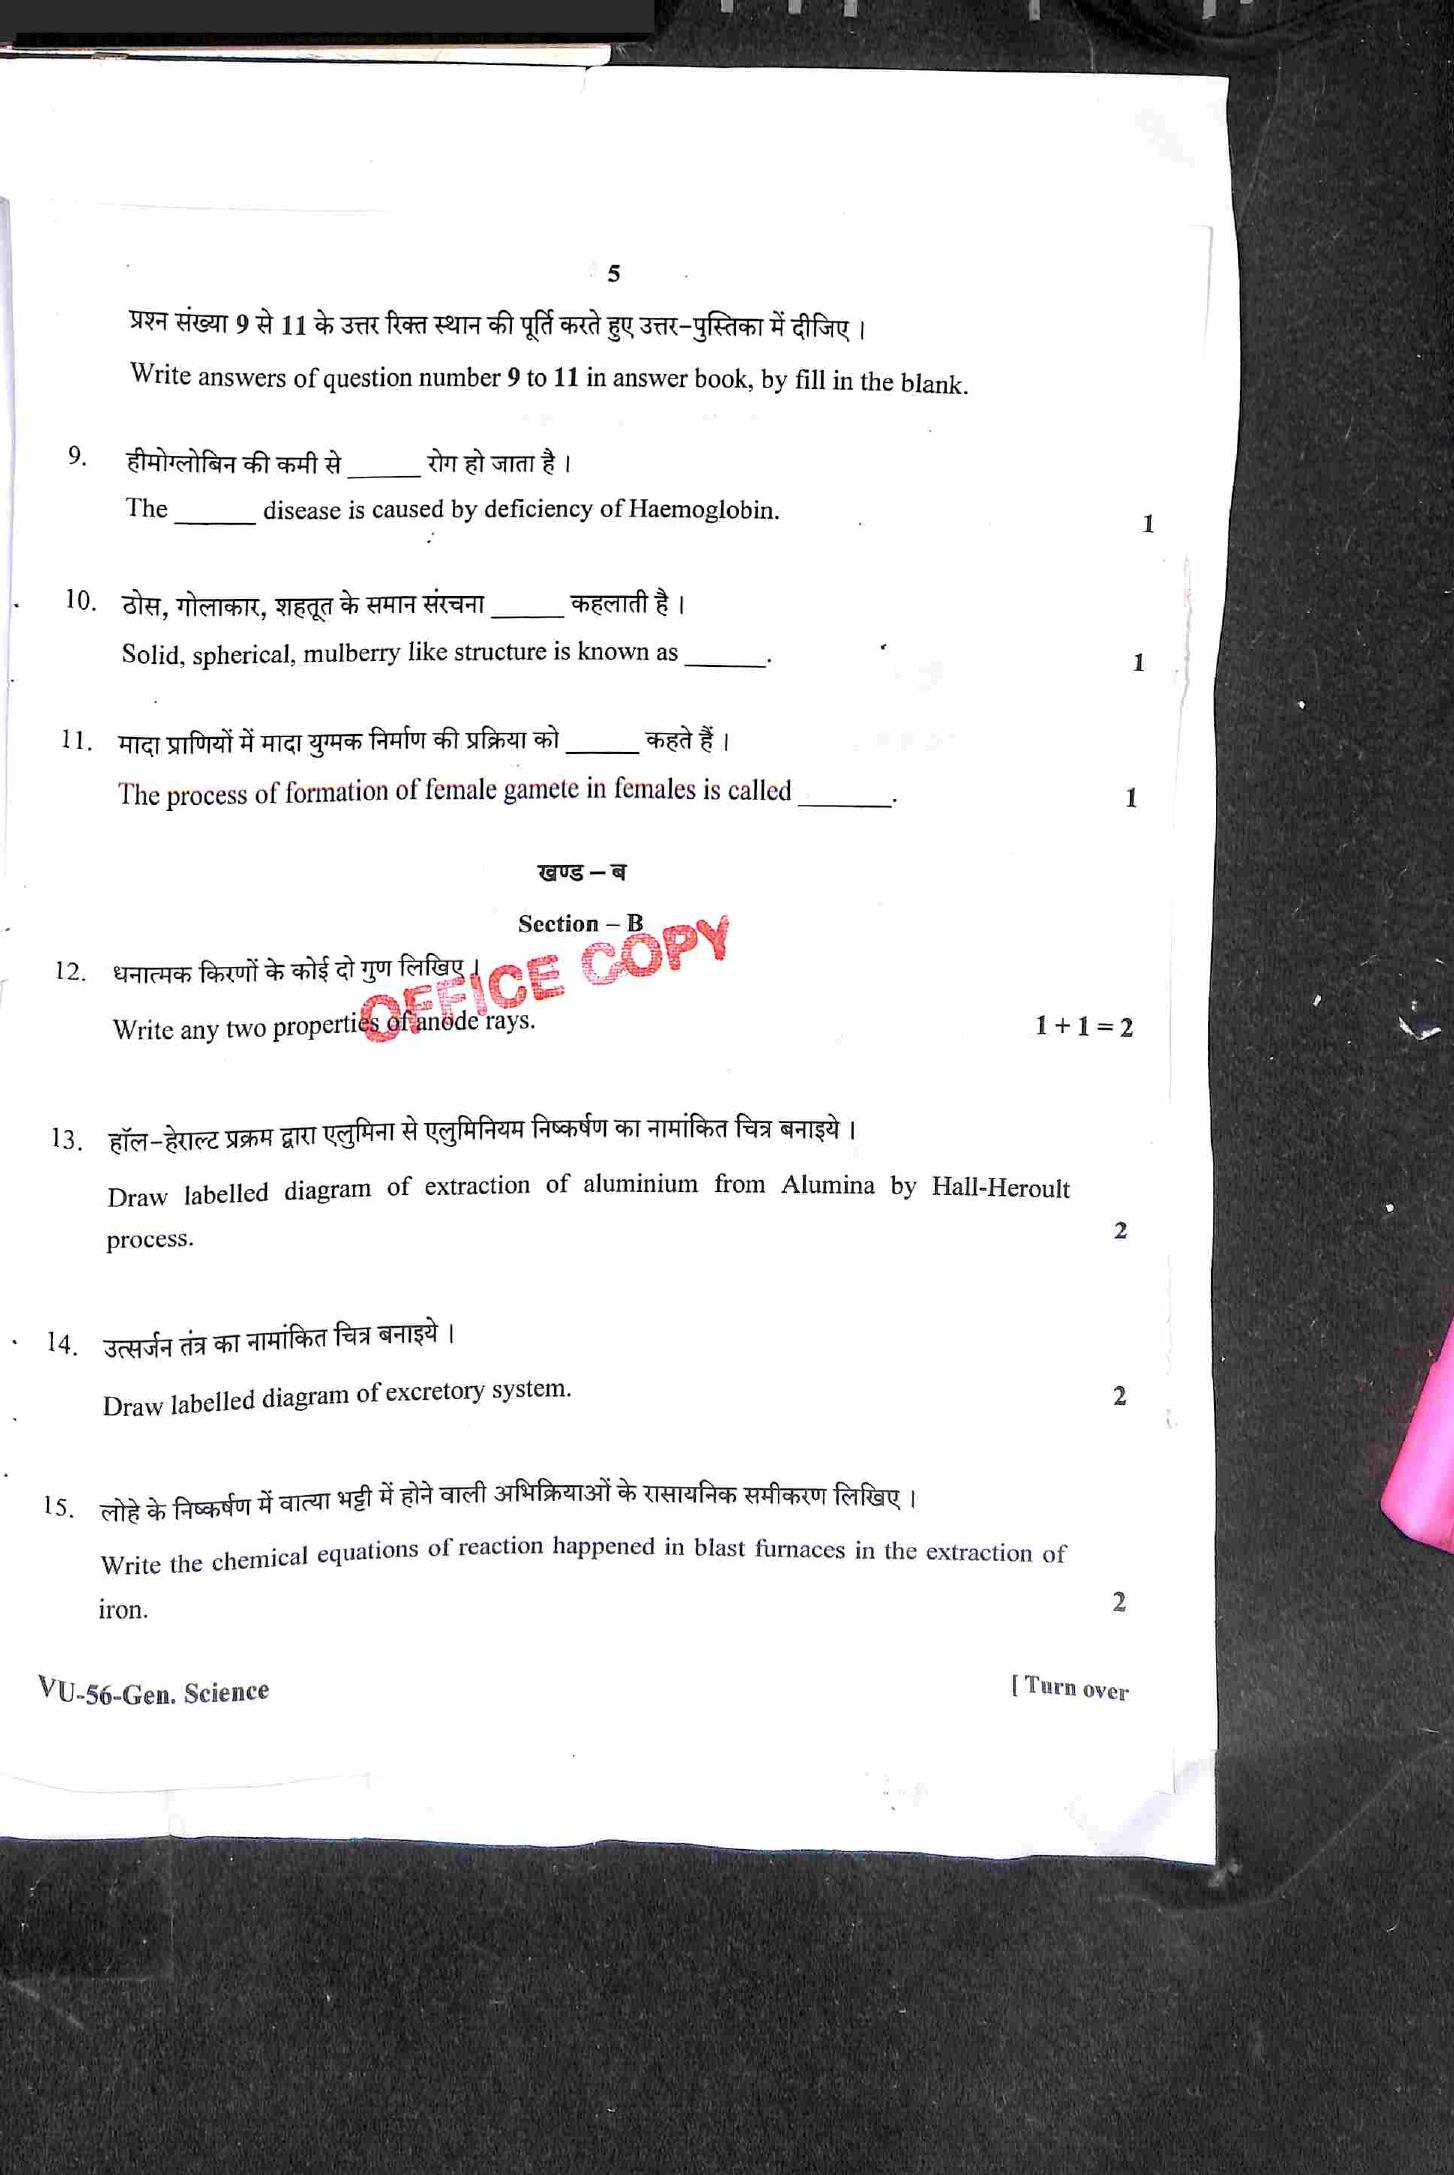 RBSE 2021 General Science Upadhyay Question Paper - Page 6